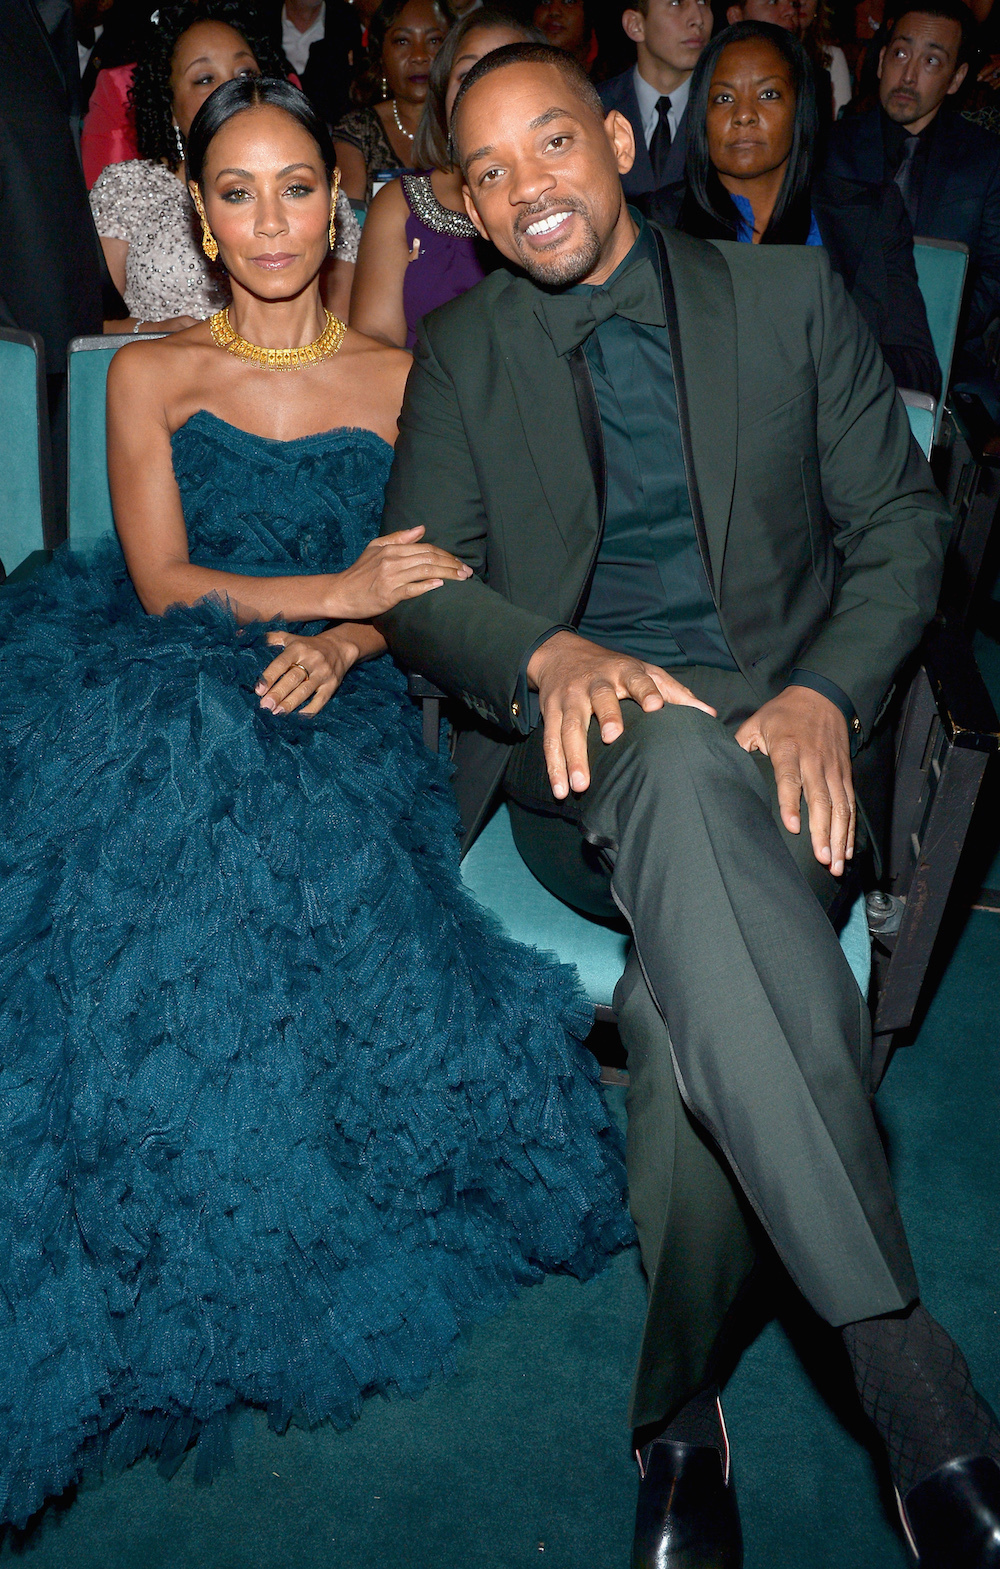 will and jada are swingers